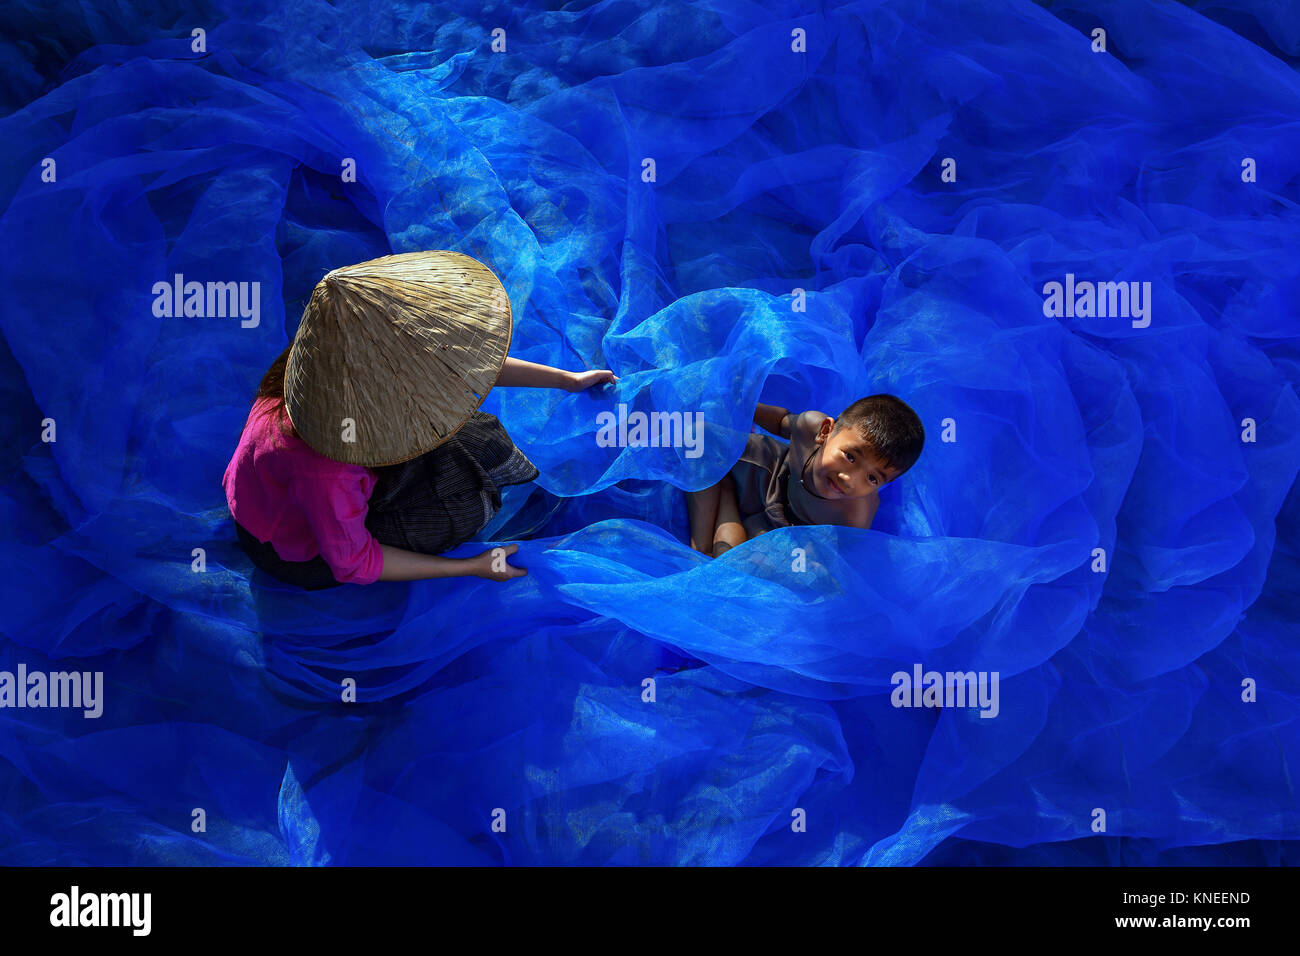 Overhead view of a woman and boy repairing a fishing net, Thailand Stock Photo